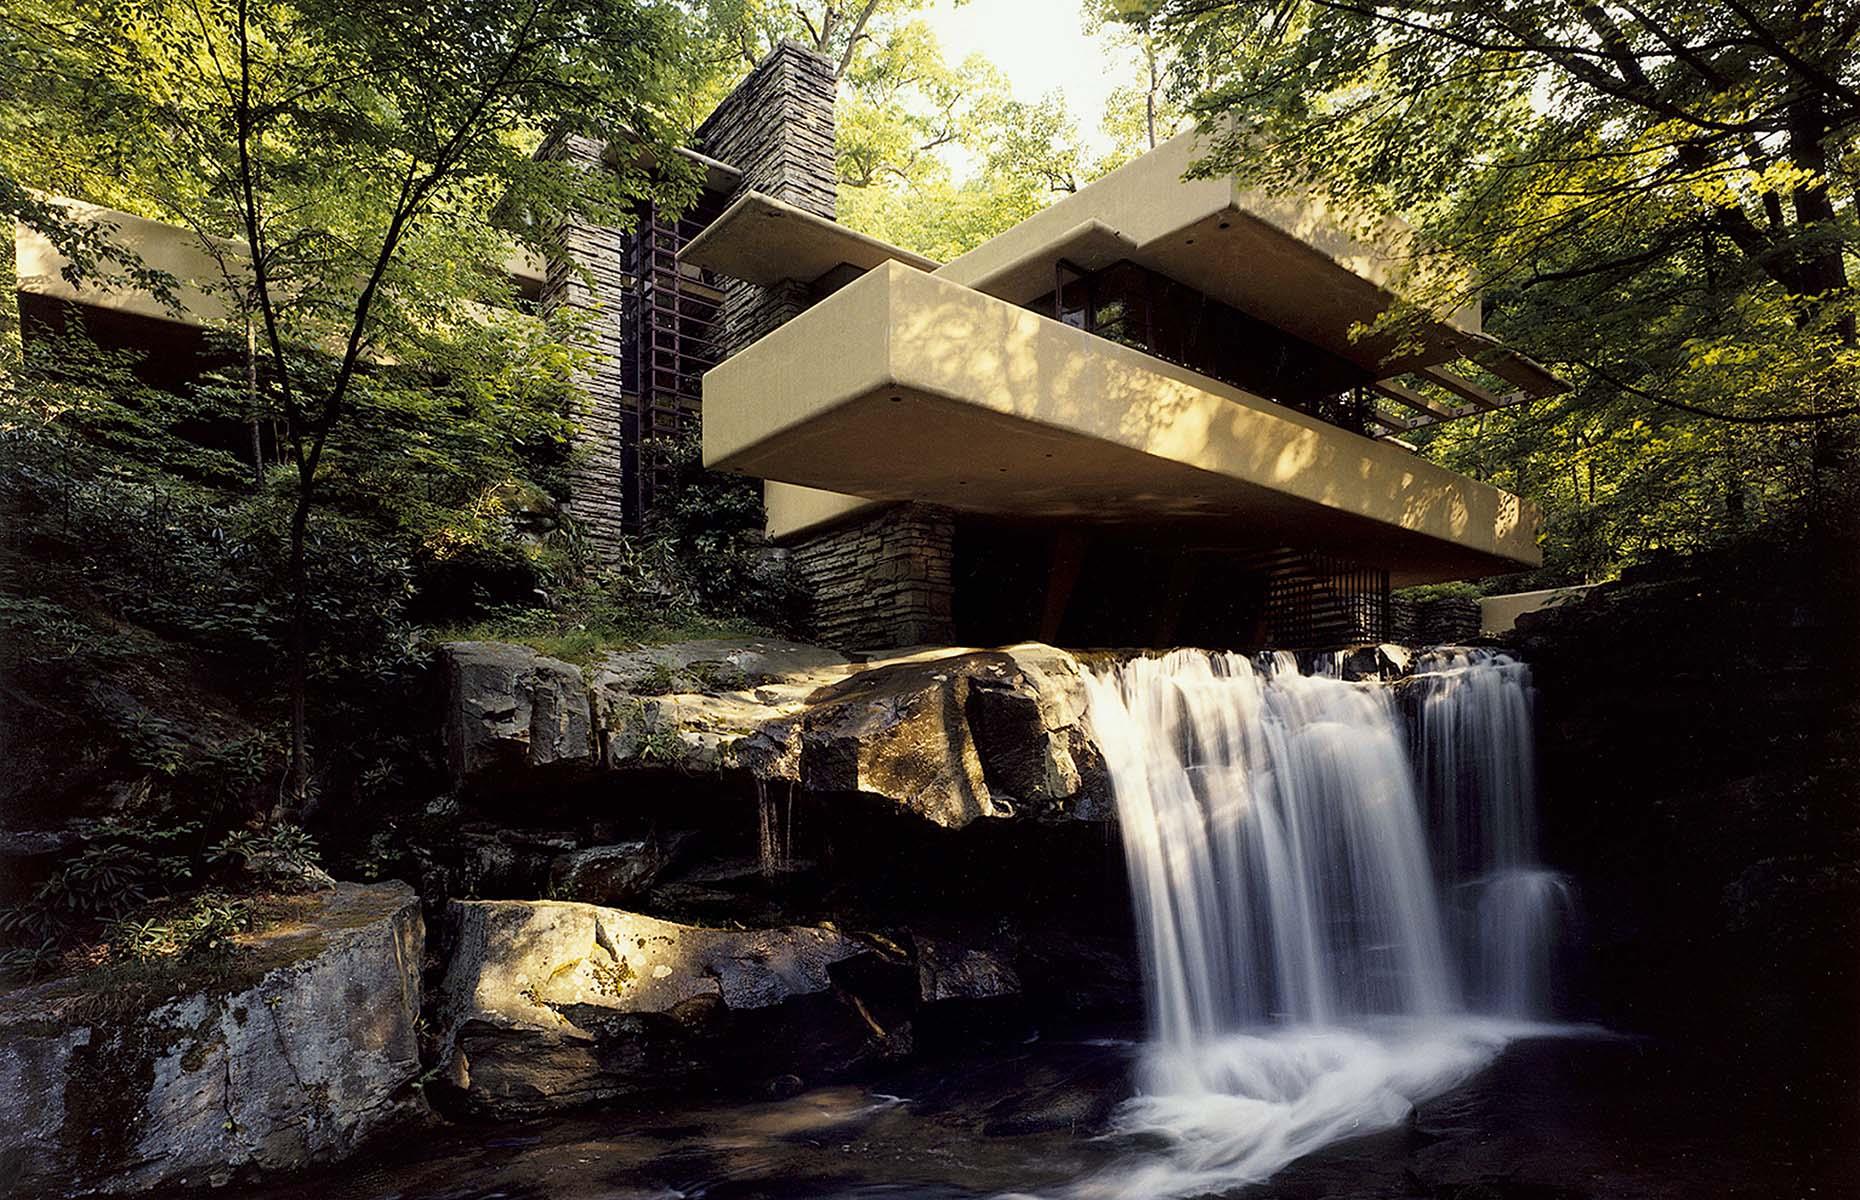 <p>It’s a rare treat to see one of Frank Lloyd Wright’s buildings exactly as he intended. Hovering over cascading waterfalls, the multi-tiered house somehow blends in with its forest surroundings and brings the outside in with numerous terraces, walkways and wall-to-ceiling windows. Built in 1935, the house was originally designed as a weekend home for the family of Liliane and Edgar Kaufmann Sr, owner of Kaufmann's Department Store. It was used by the family until 1963 when Edgar Kaufman Jr donated it to the Western Pennsylvania Conservancy.</p>